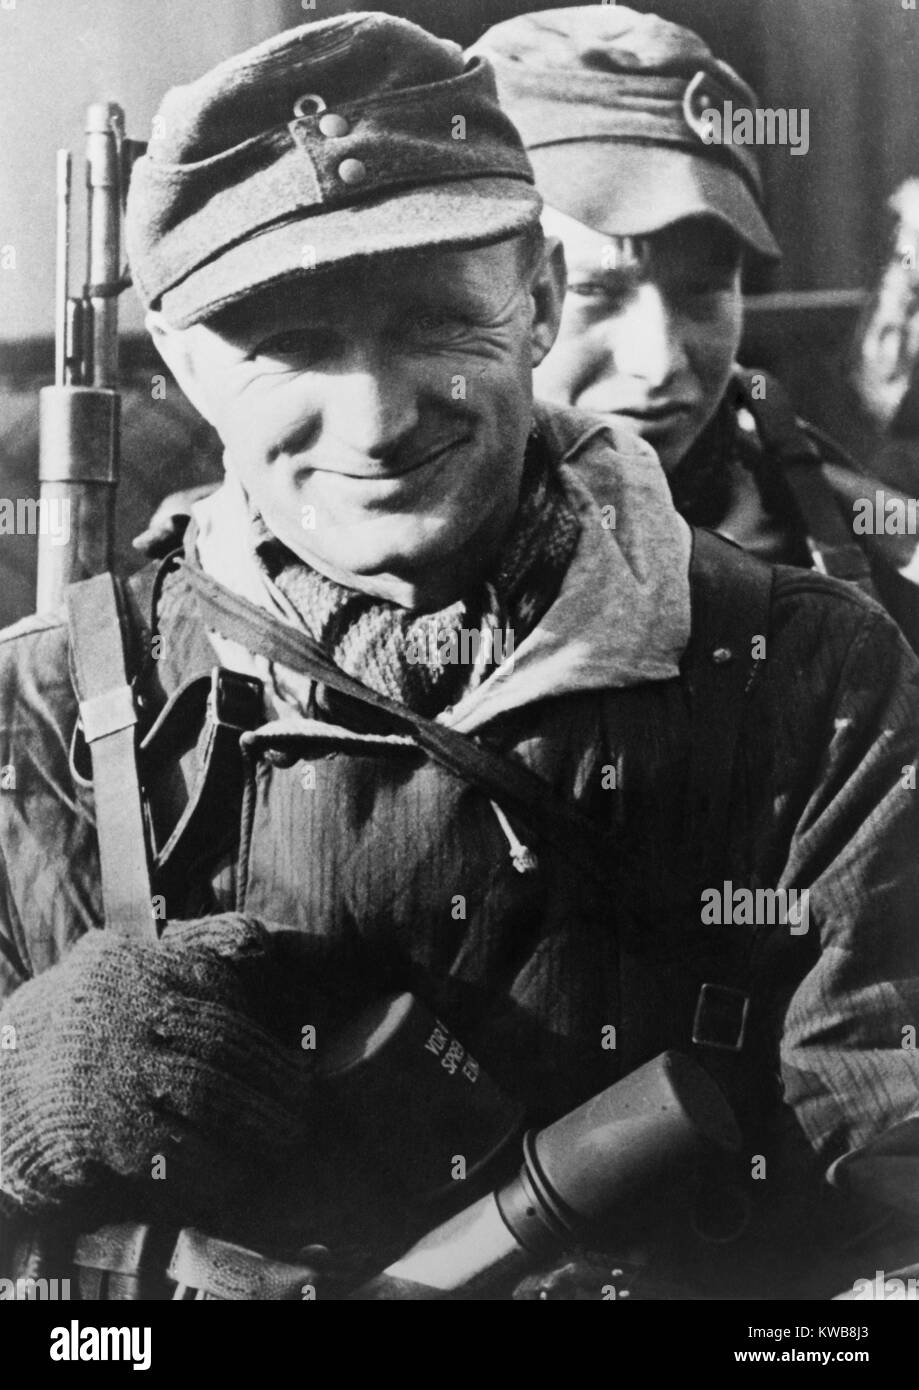 Two German soldiers, one middle aged, on the Oder Front in early 1945. The Soviet (Russian) armies were near but paused, after their successful Vistula–Oder Offensive of Jan. 12 -Feb. 2, 1945. Germany, World War 2. (BSLOC 2014 8 99) Stock Photo